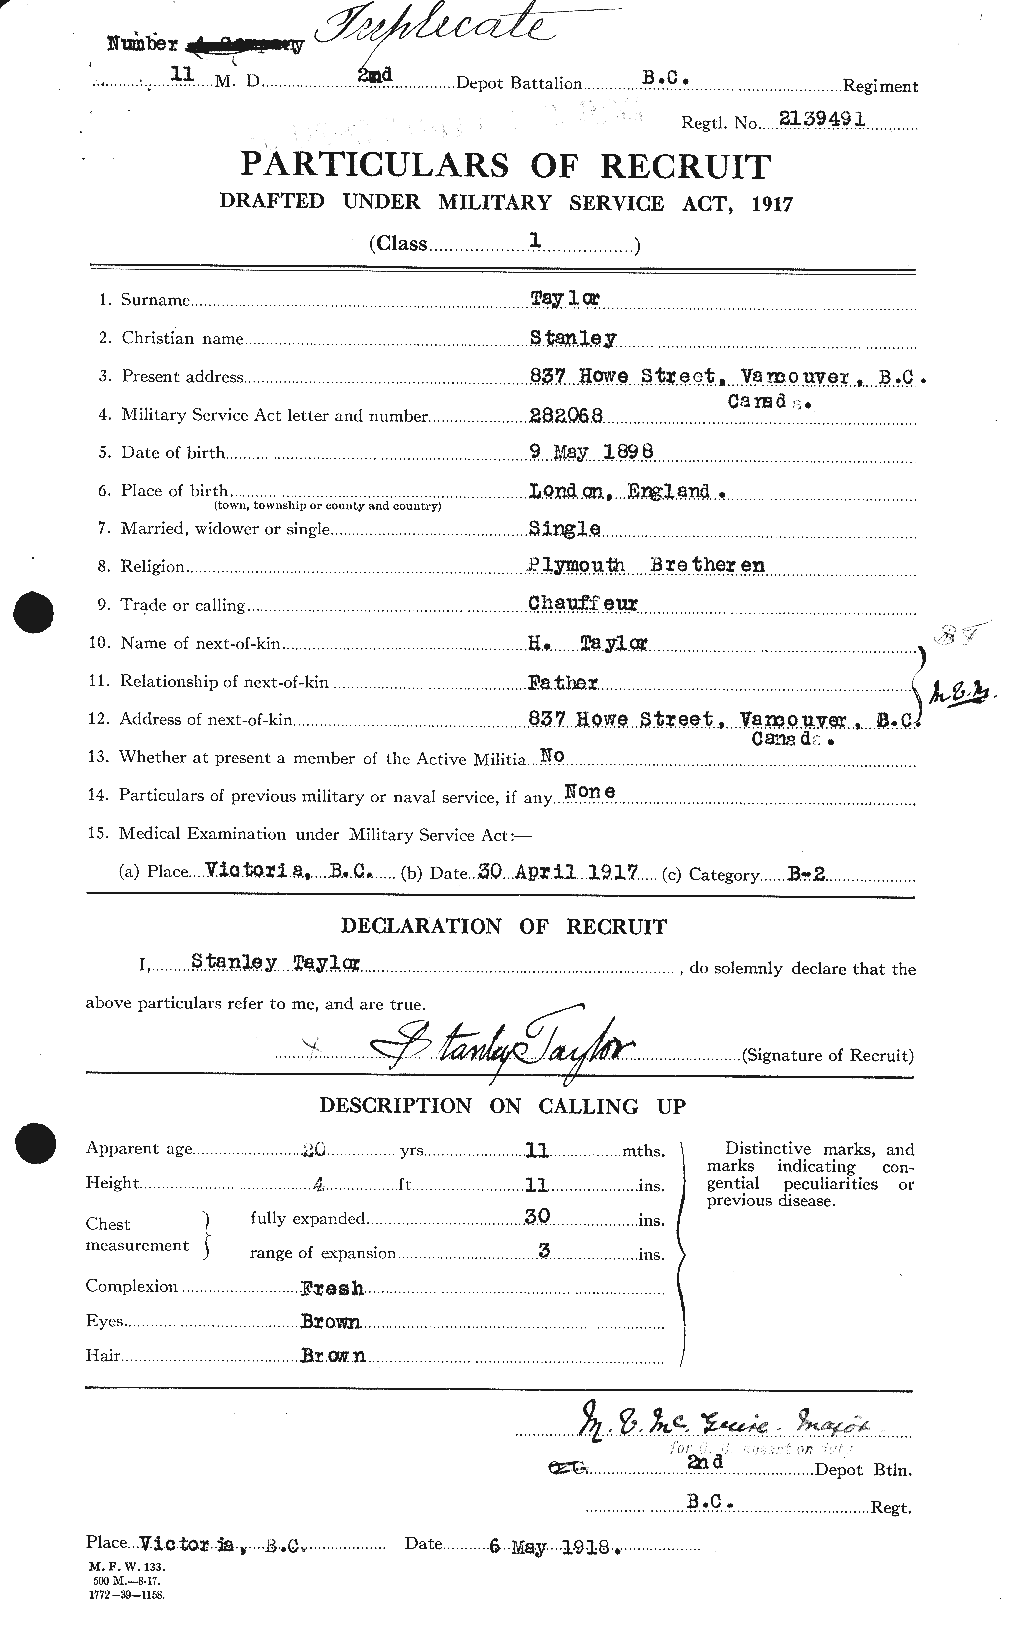 Personnel Records of the First World War - CEF 627913a